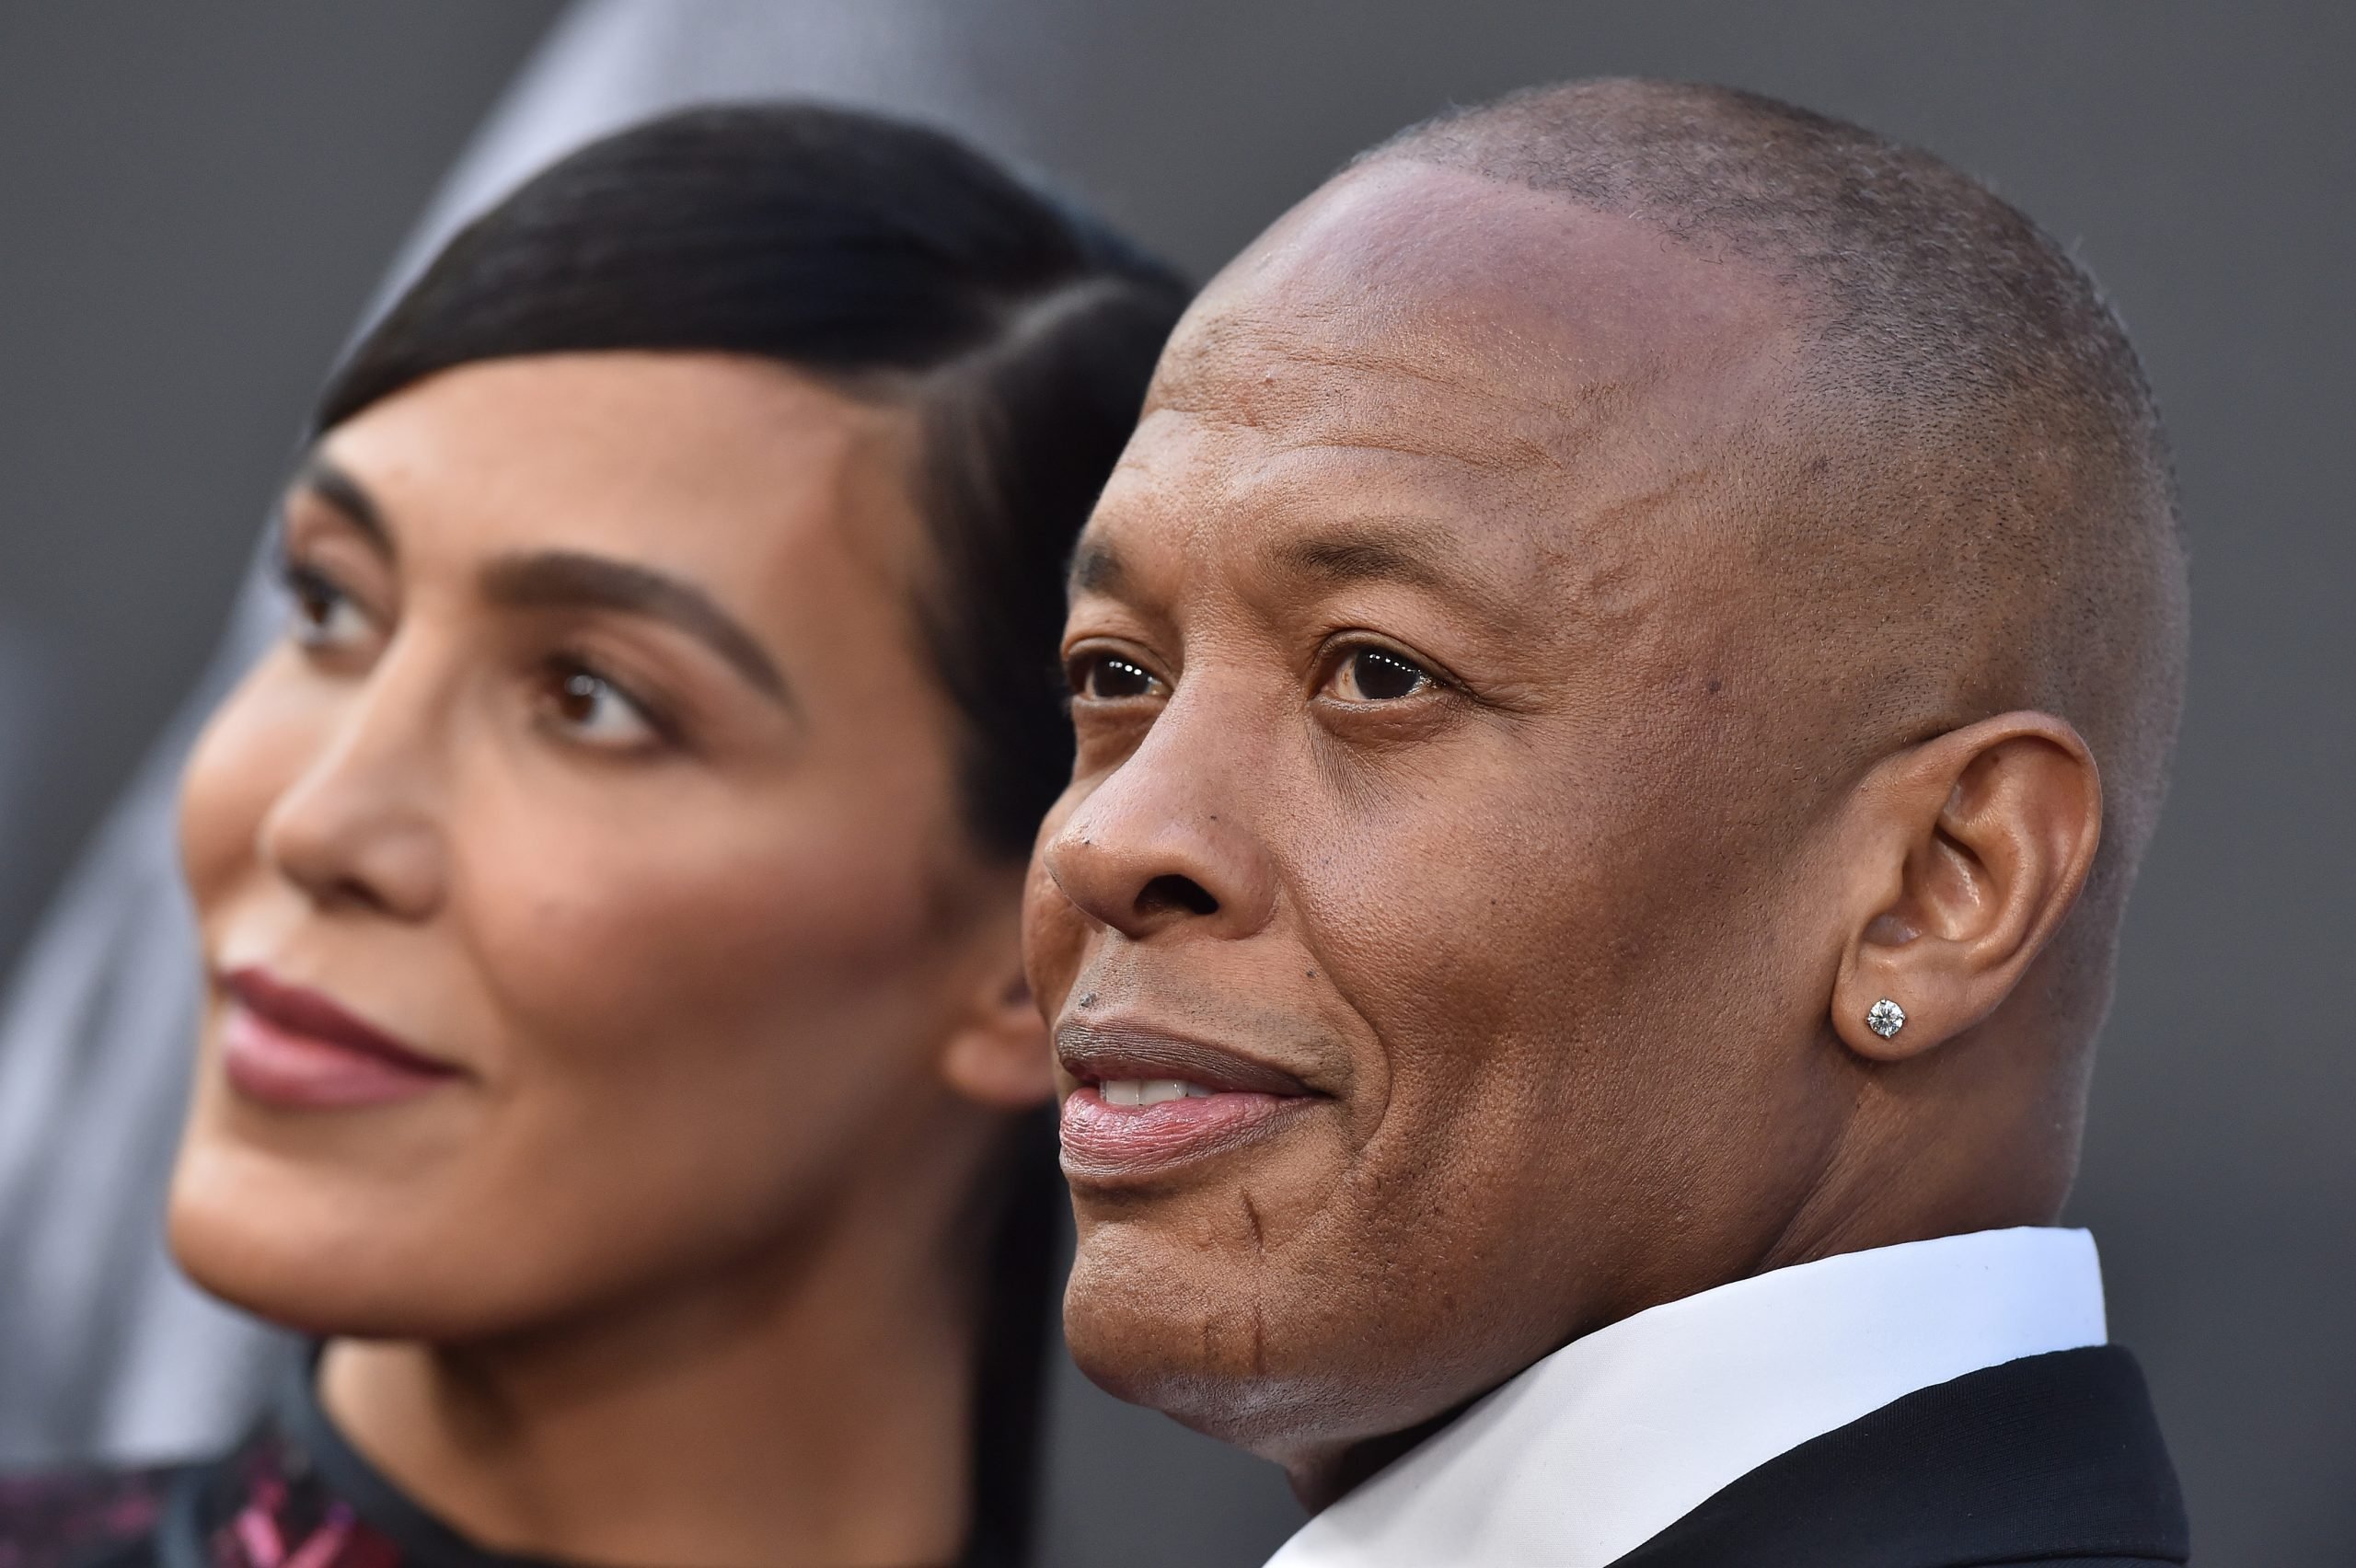 There’s an Insane Amount of Money at Stake in Dr. Dre’s Divorce